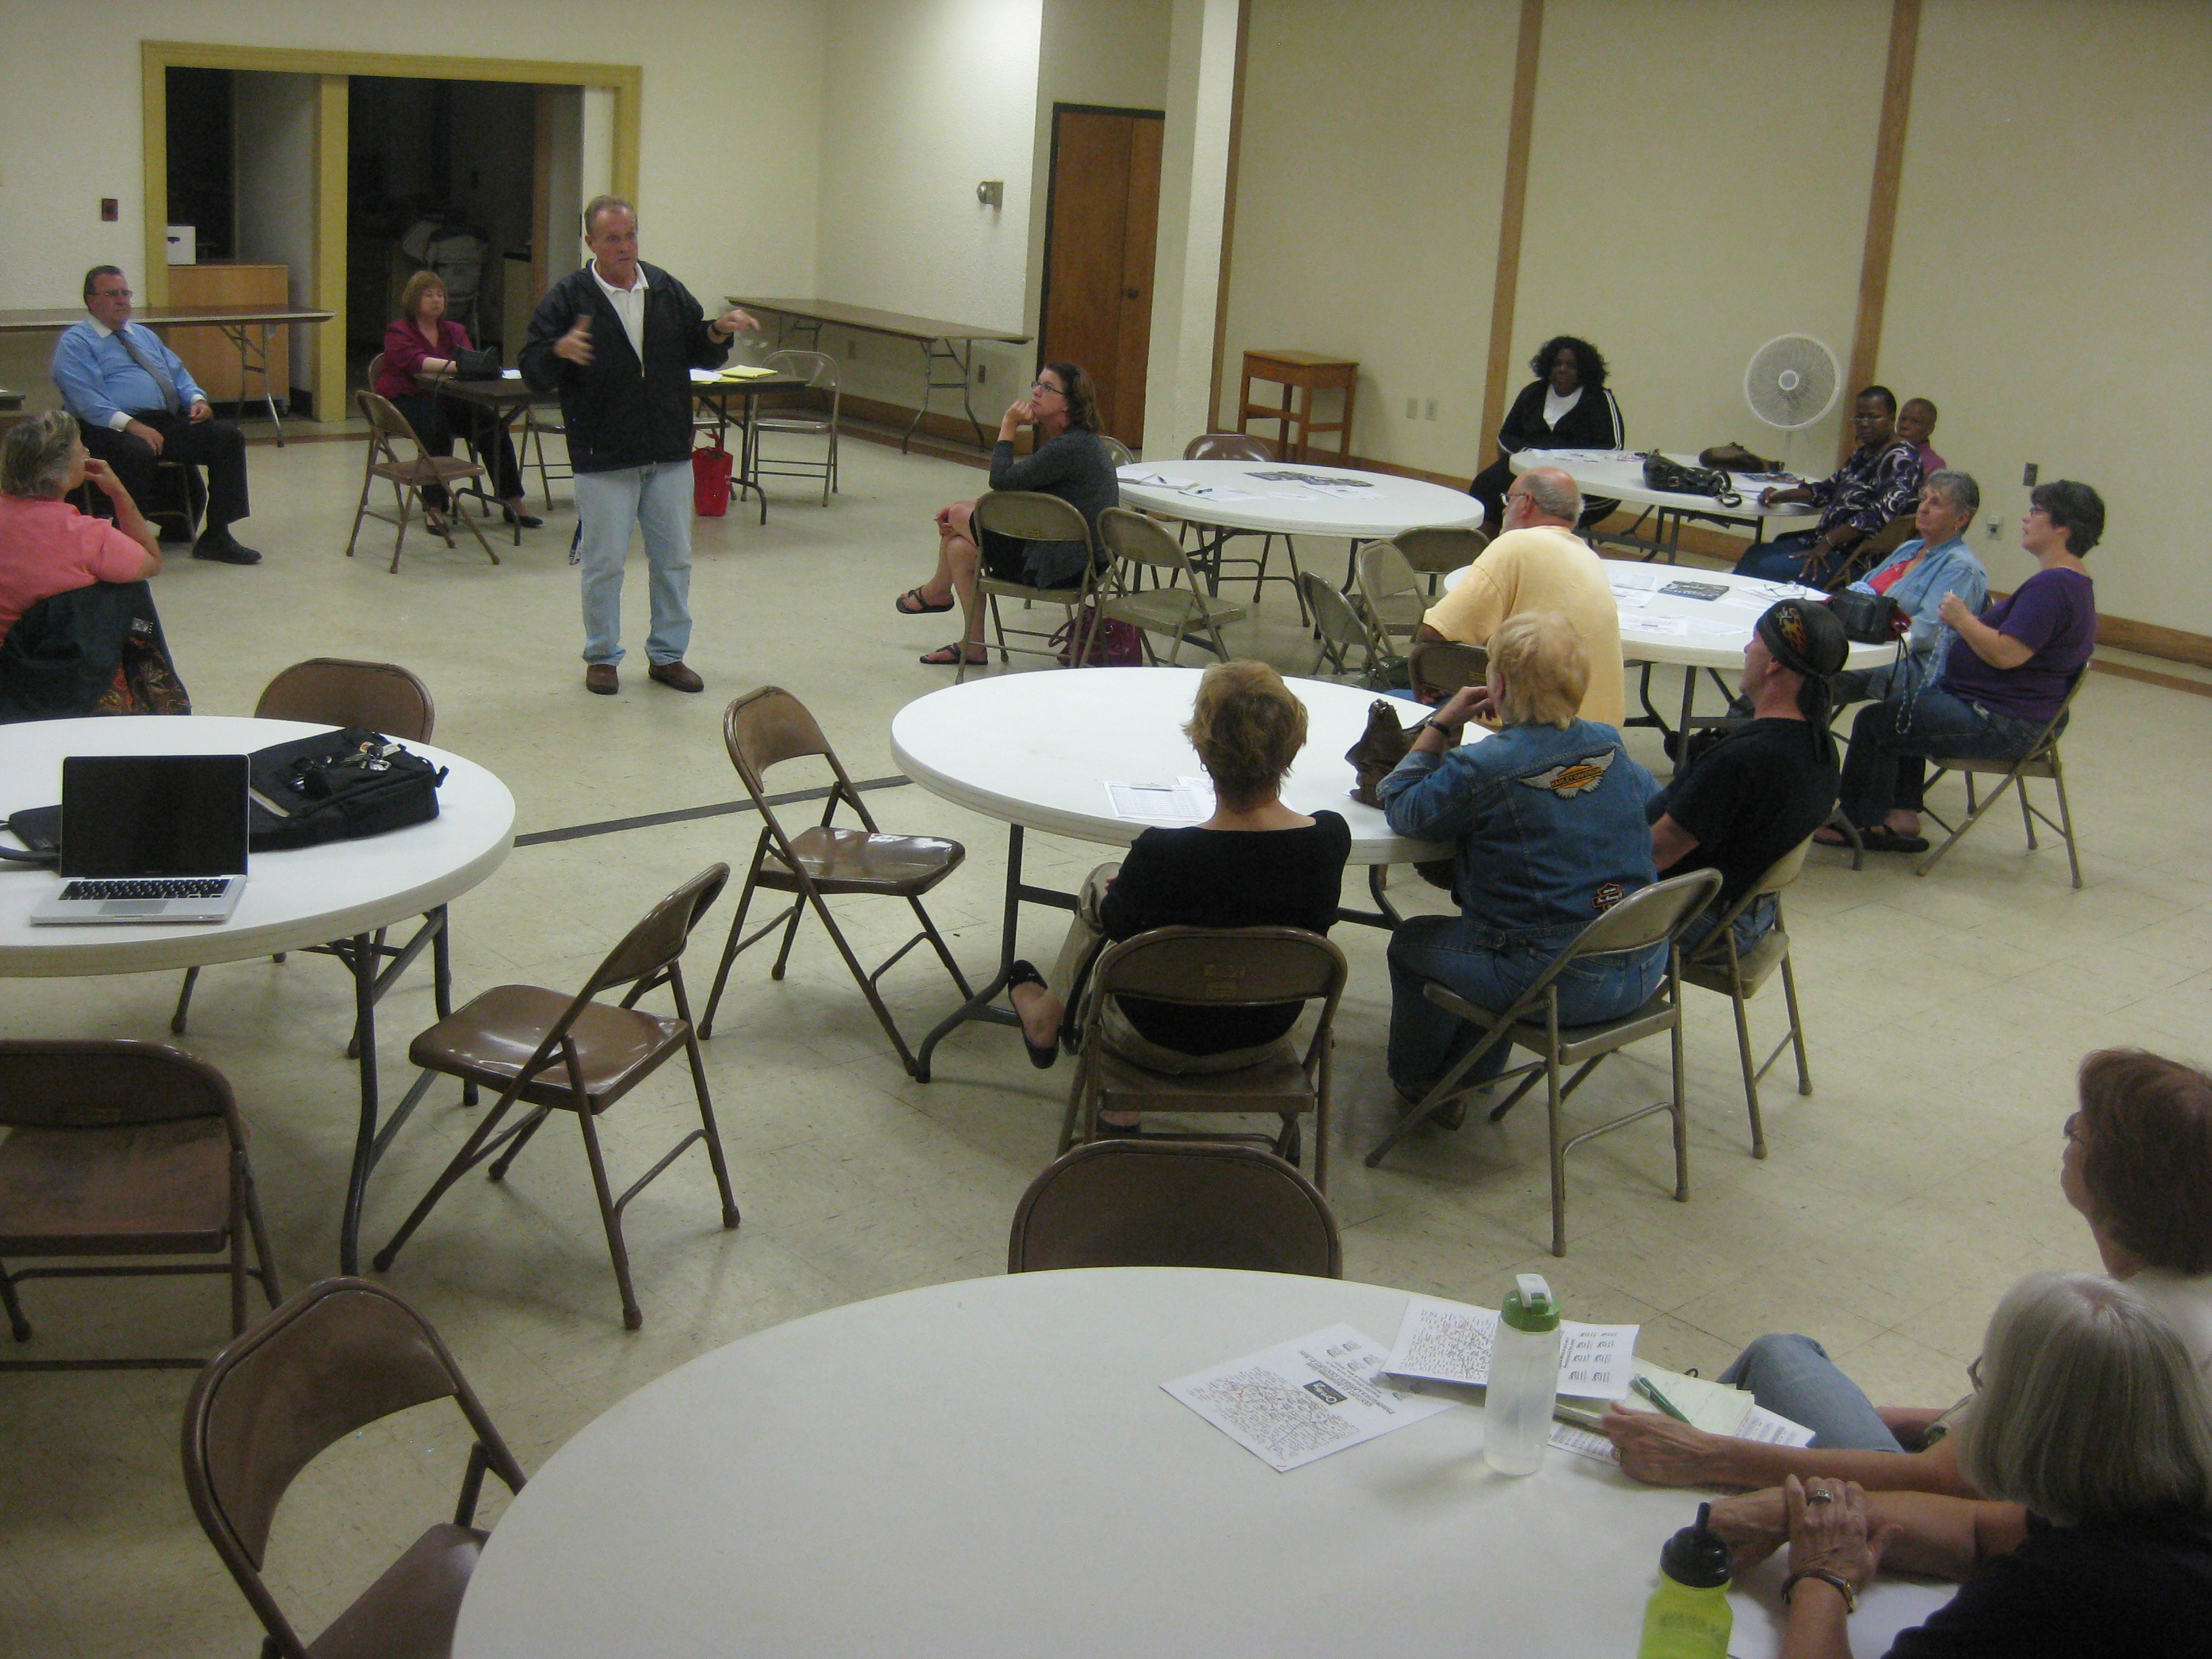 Northwood Civic Association President Barry Howell discusses the Frankford Y at the Sept. 20, 2011 meeting.